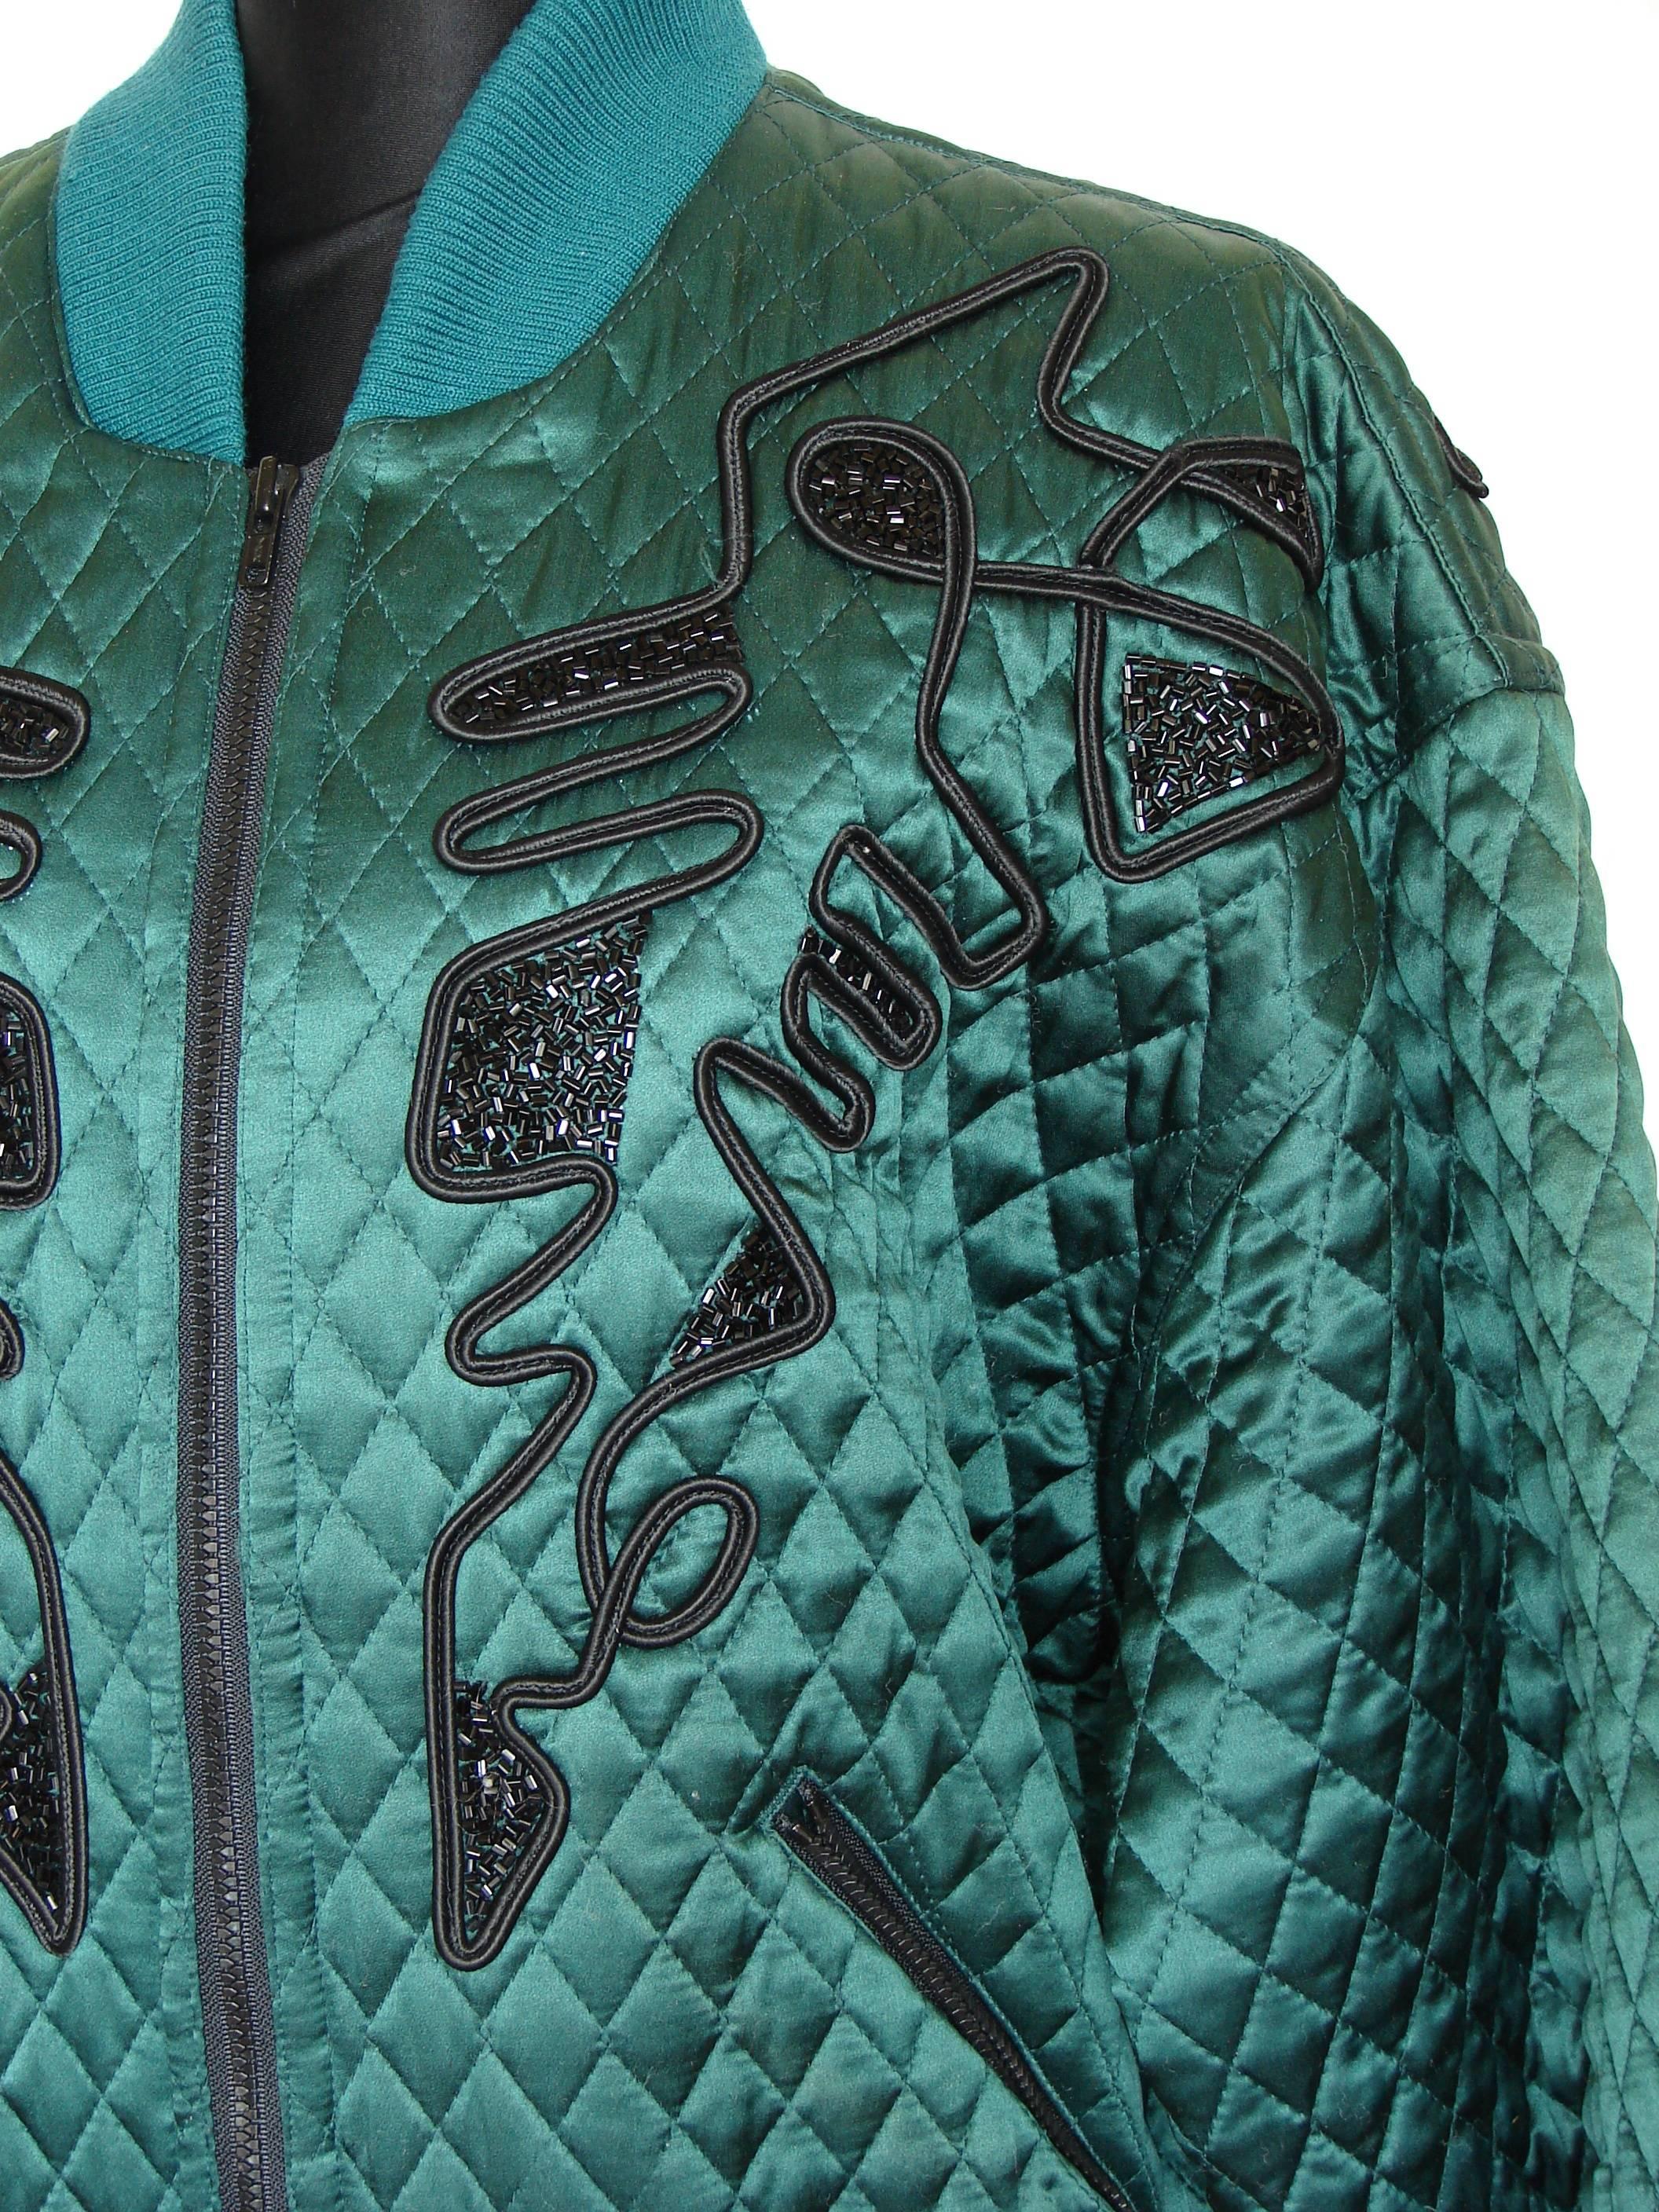 Women's Kansai Yamamoto O2 Green Quilted Silk Jacket with Black Jet Bead Designs 1980s M